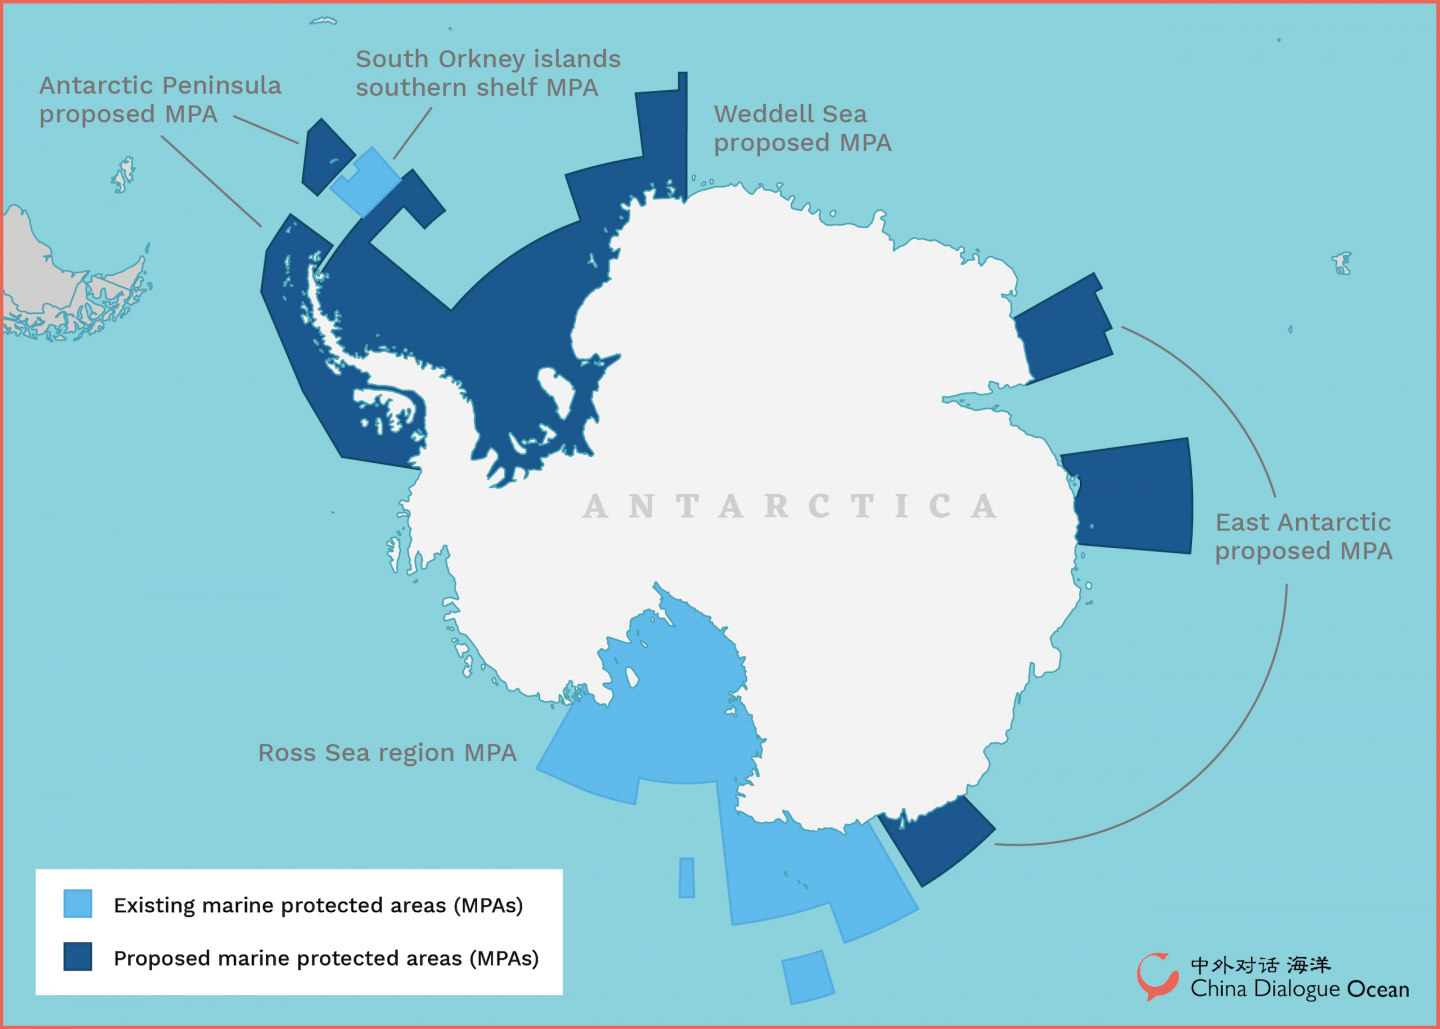 map showing existing and proposed marine protected areas in the Antarctica